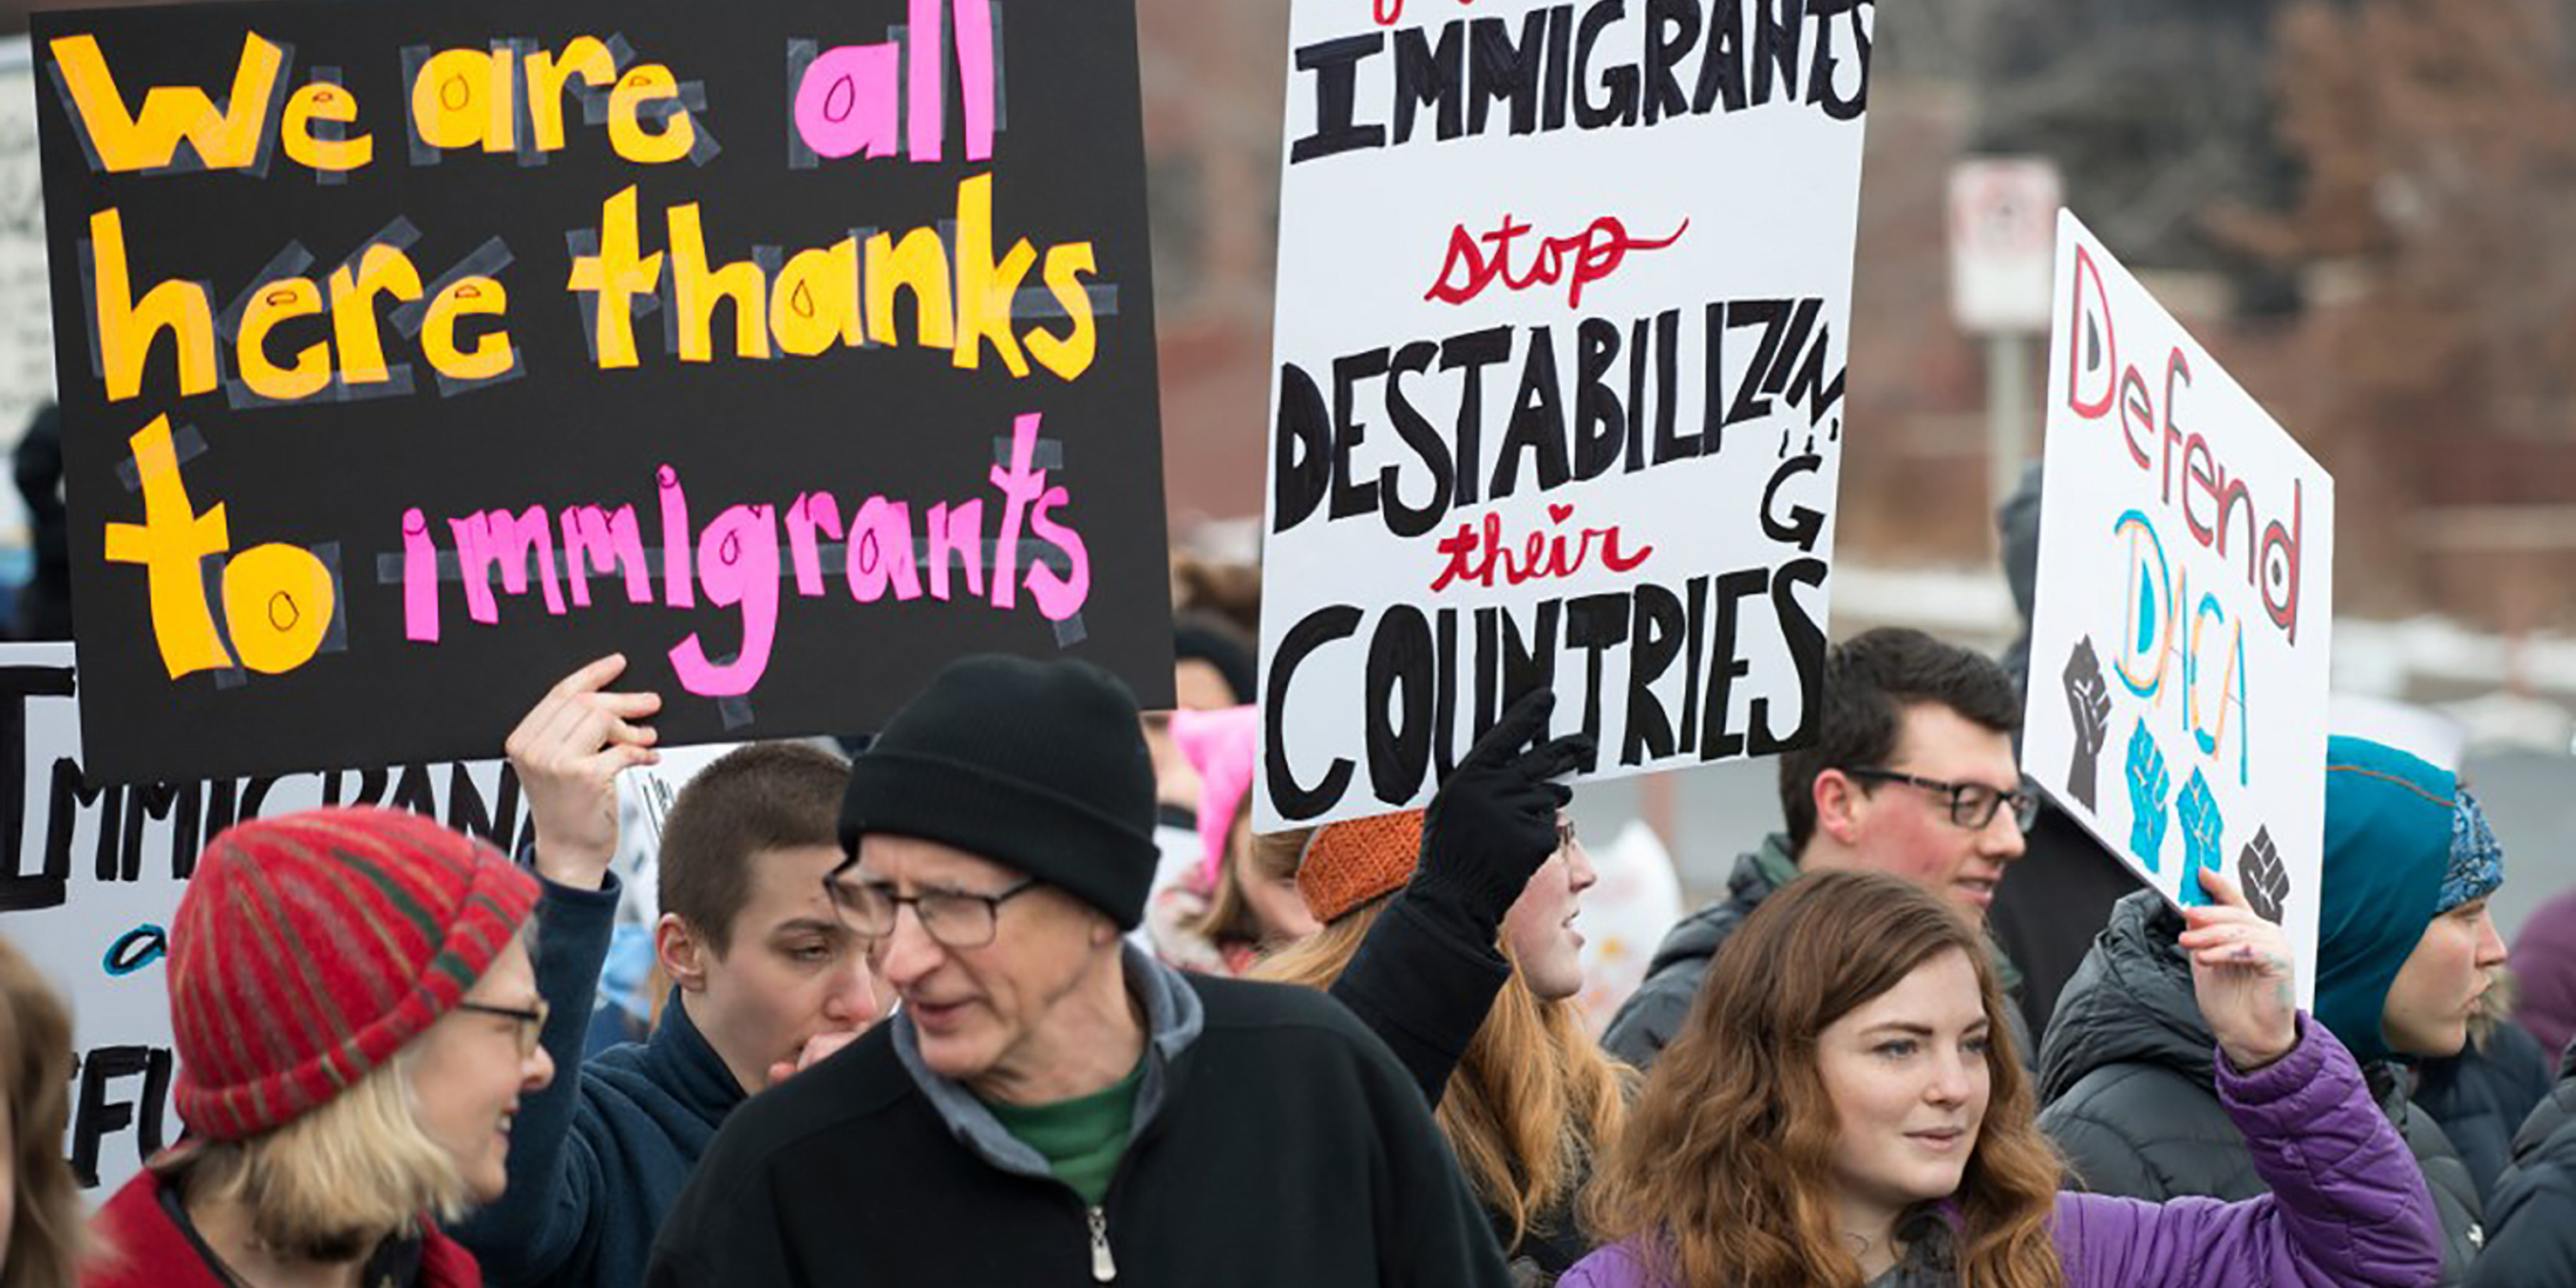 Protesters with signs in support of immigrants: "We are all here thanks to immigrants", "If you don't want immigrants, stop destabilizing their countries"; "Defend DACA"